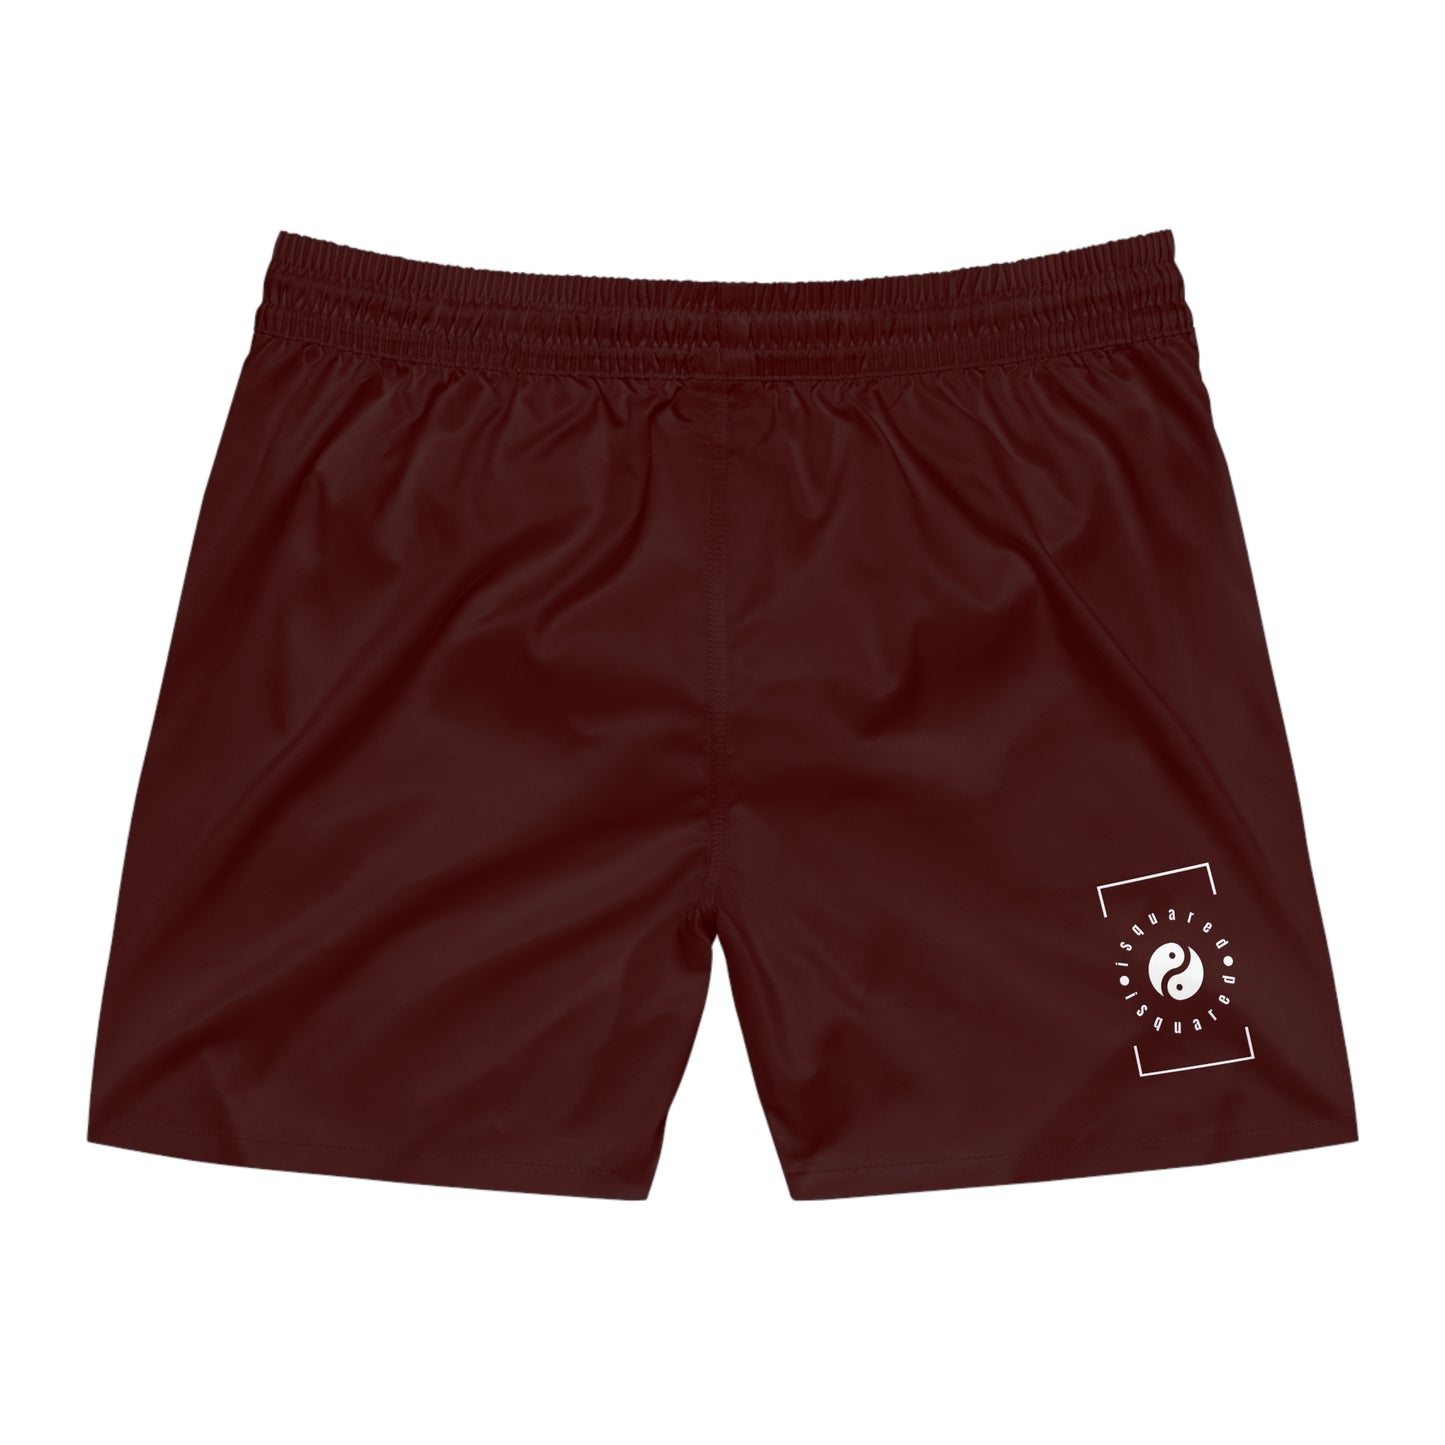 Lipstick Red - Swim Shorts (Solid Color) for Men